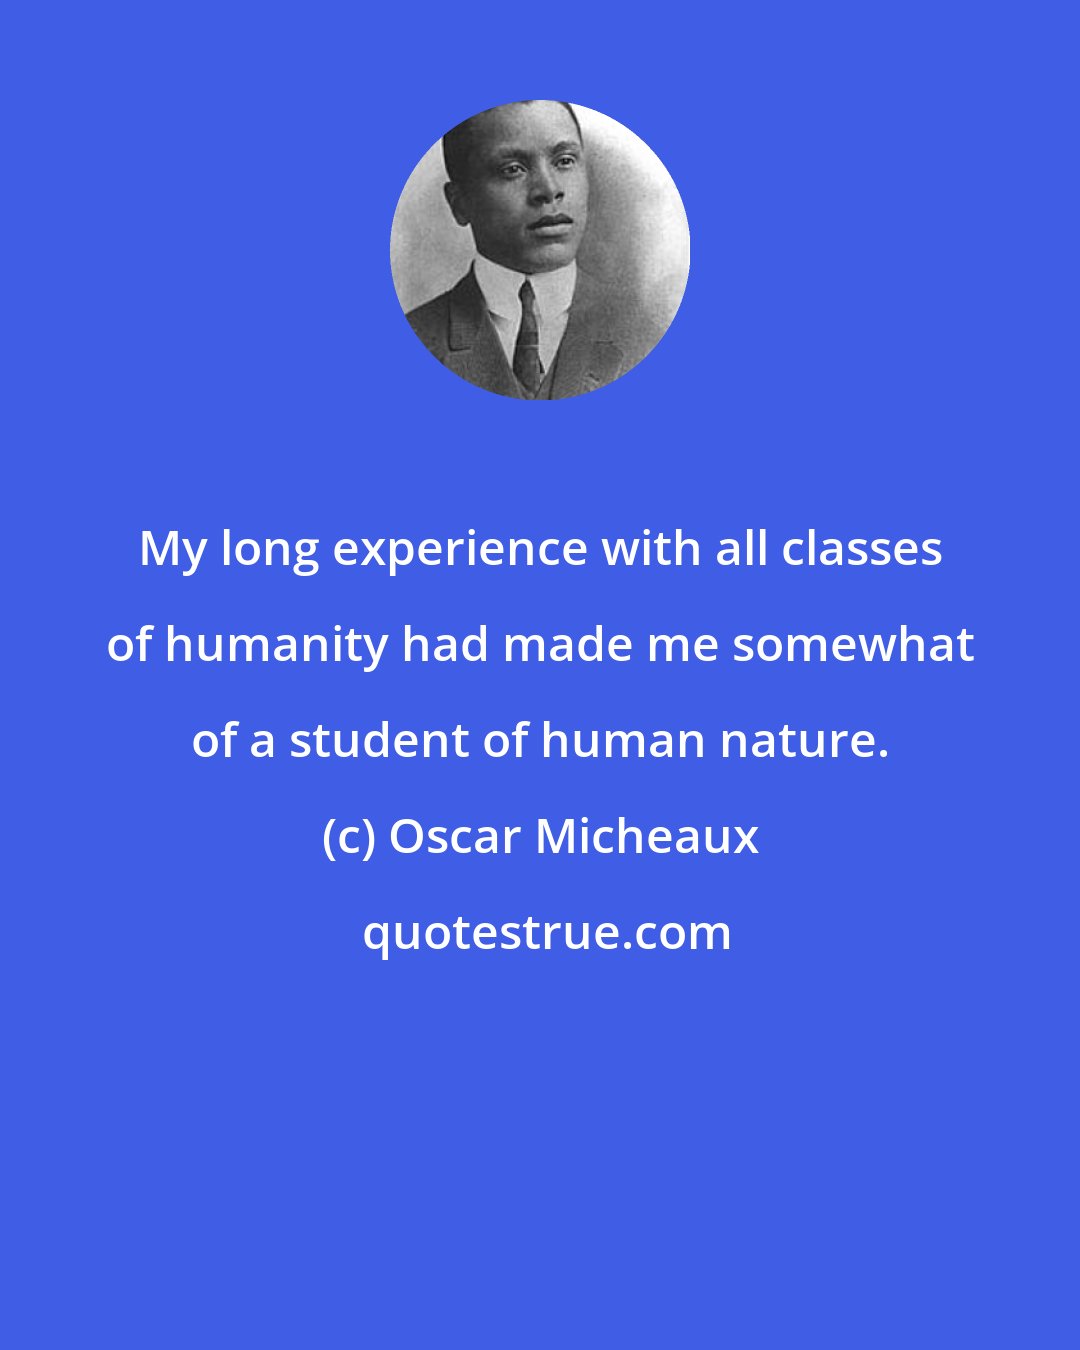 Oscar Micheaux: My long experience with all classes of humanity had made me somewhat of a student of human nature.